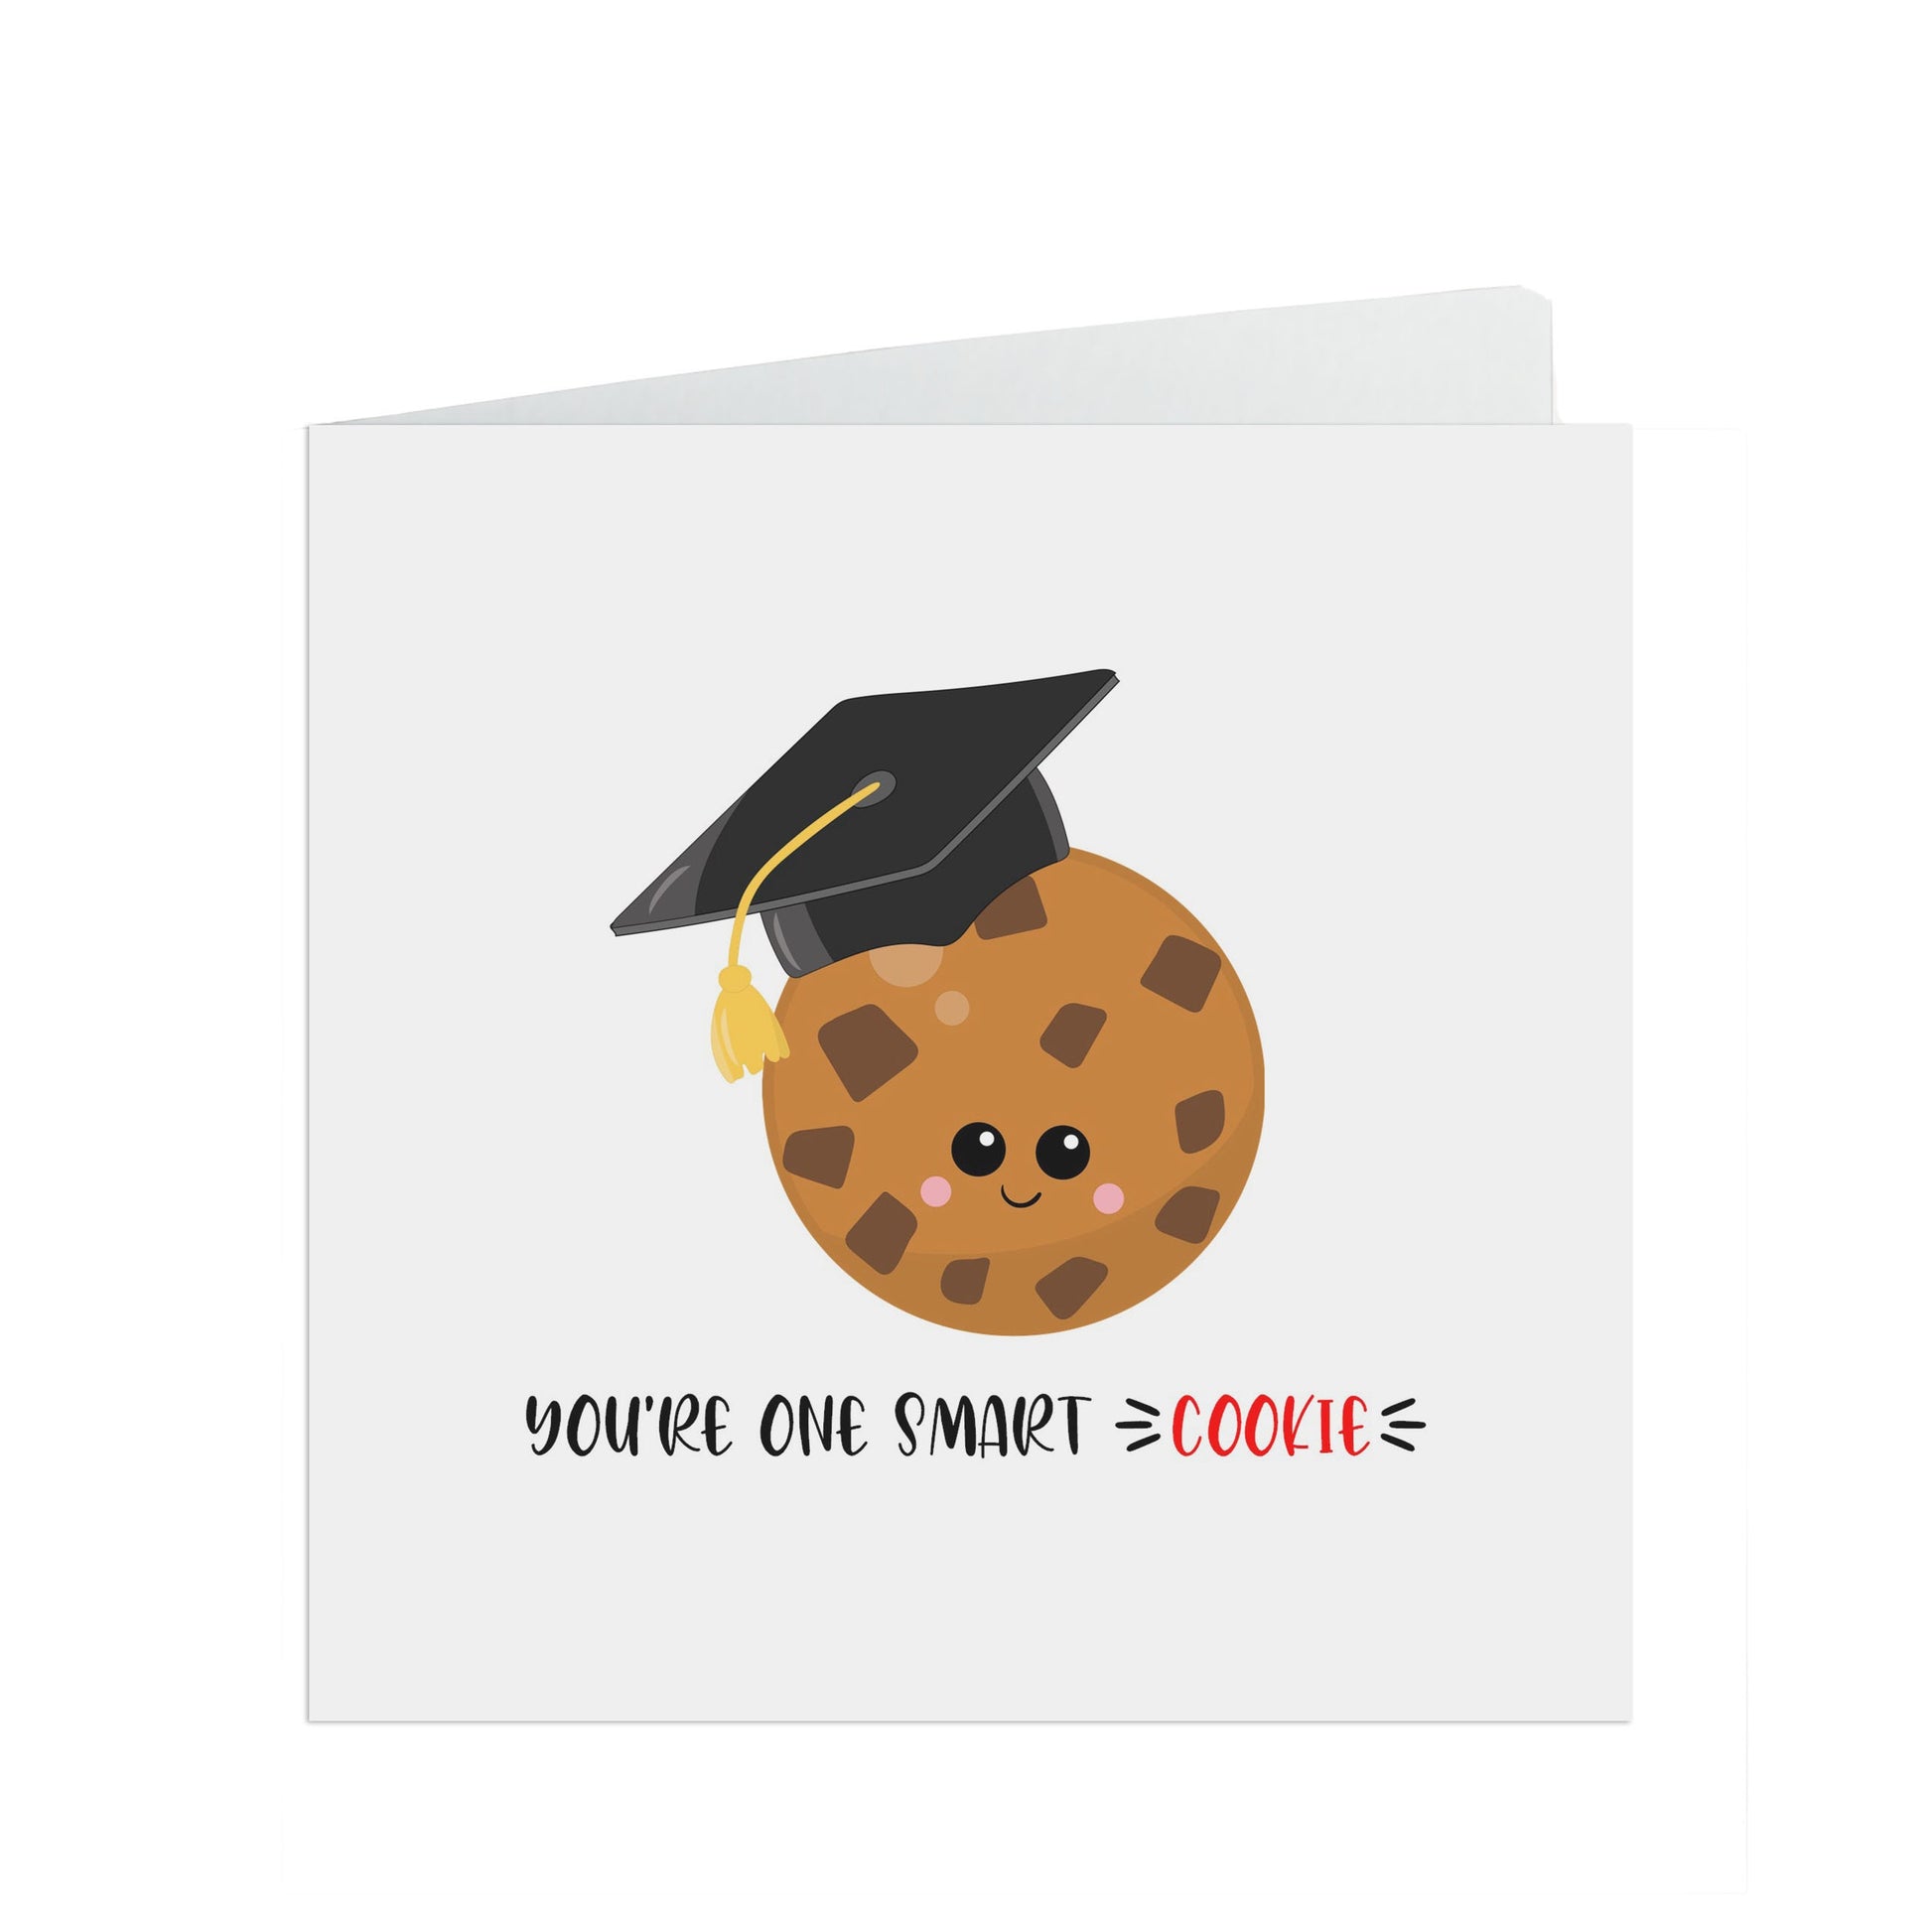 You're one smart cookie!, GCSE or A-level results funny cookie pun card